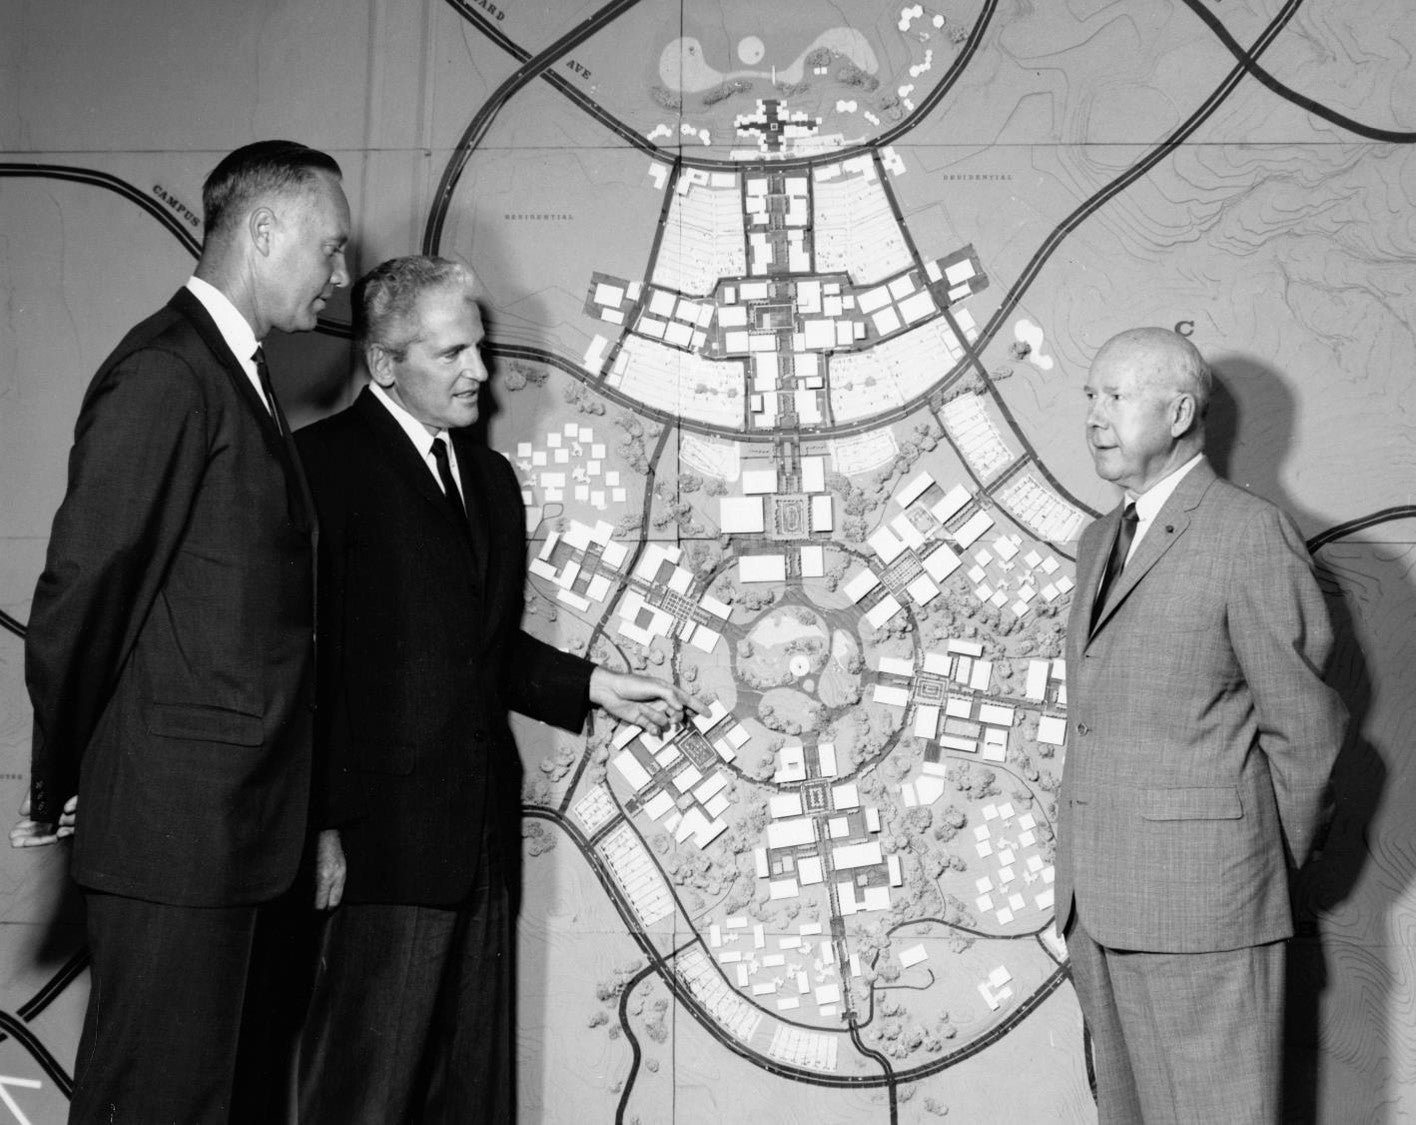 William L. Pereira (middle) with Daniel Aldrich, Jr. (left) and Charles Thomas (right), 1964